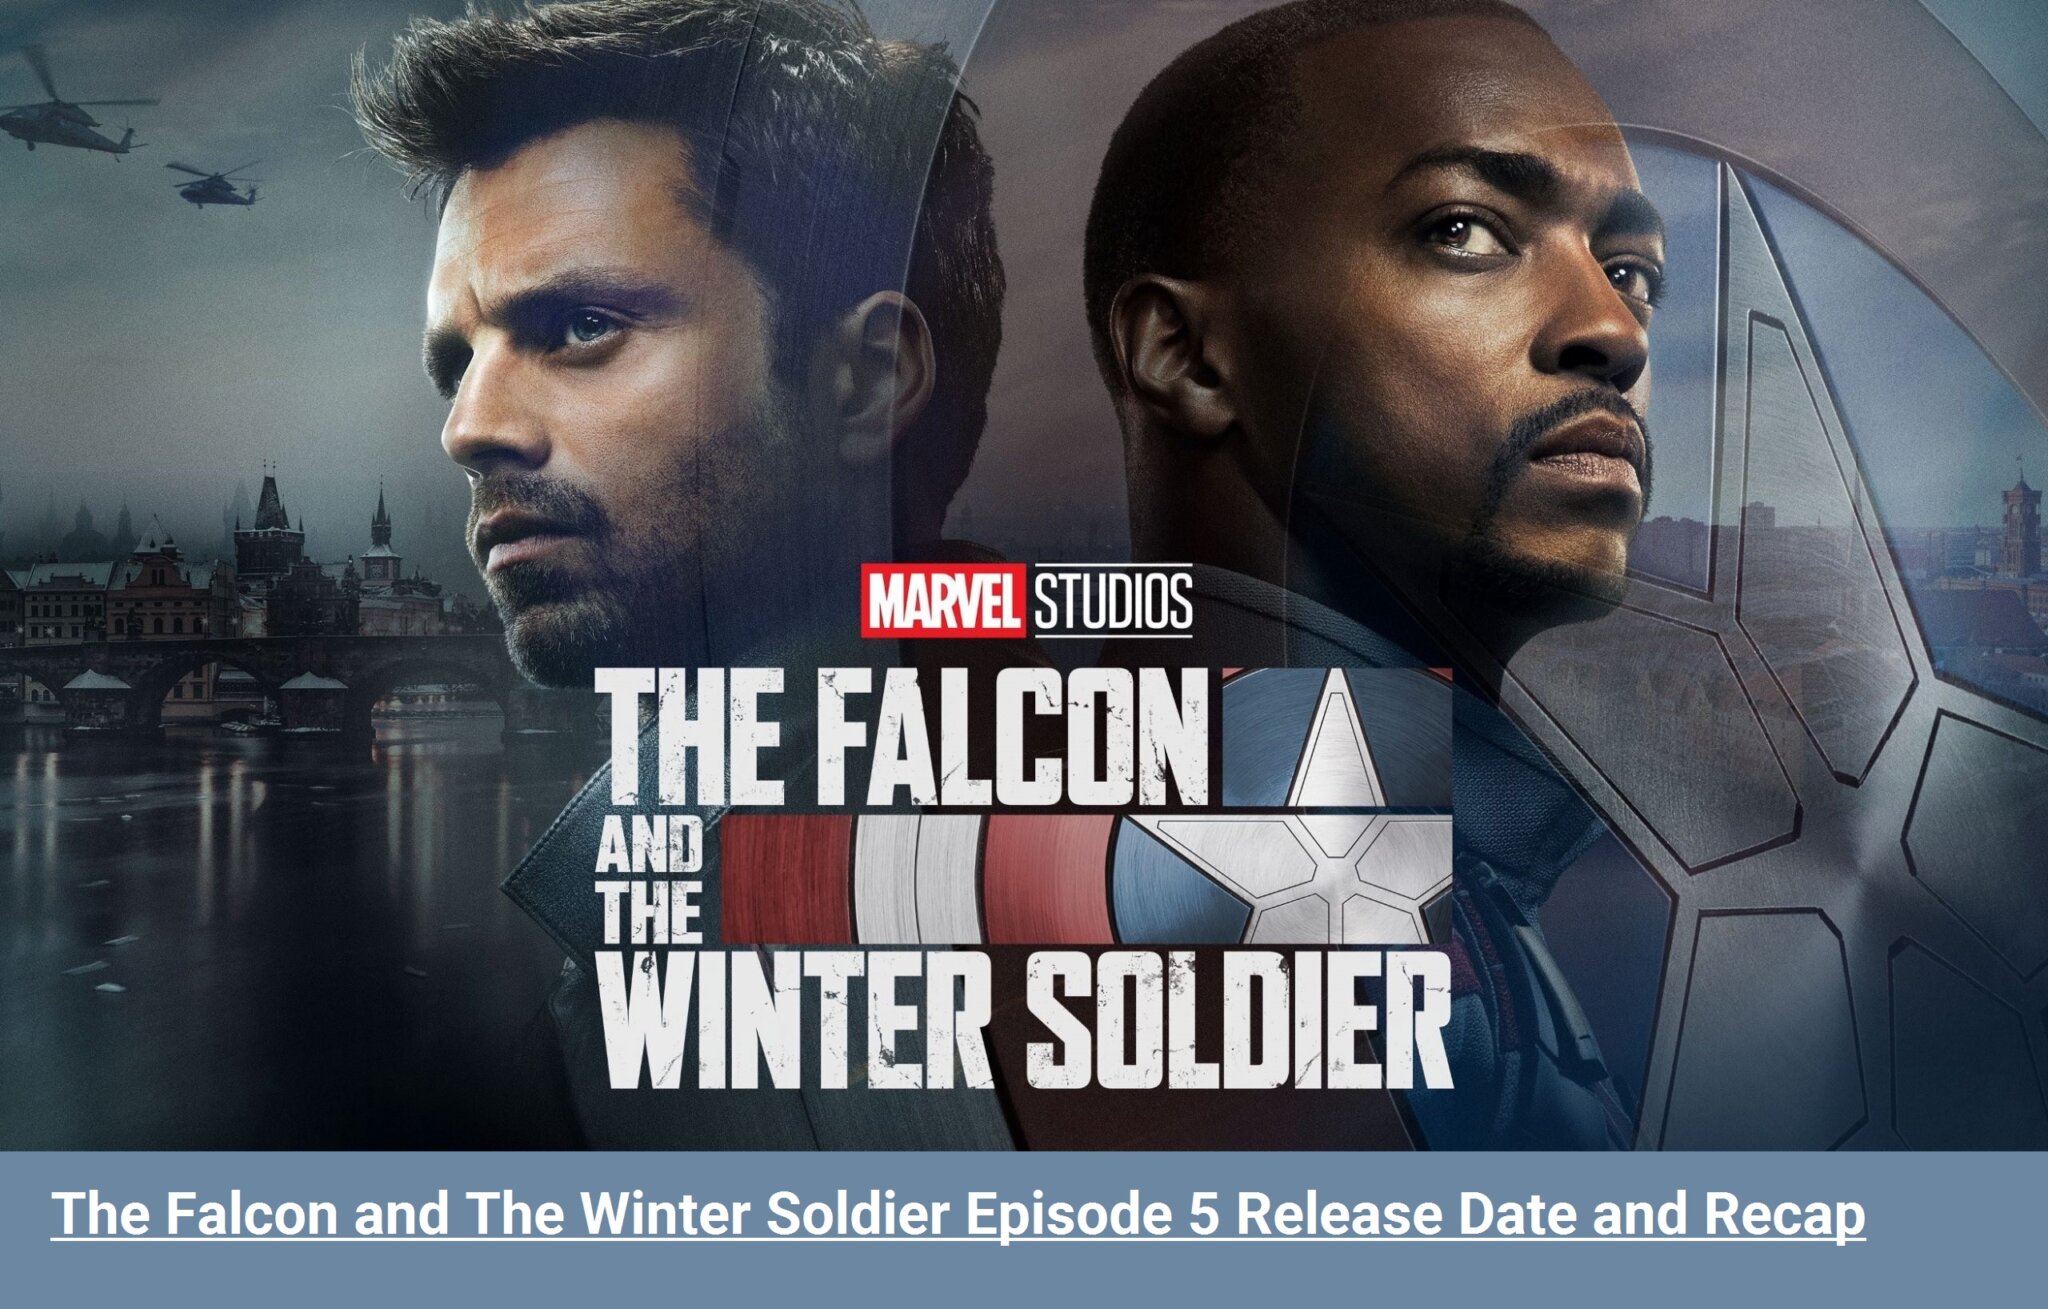 the falcon and the winter soldier first episode date